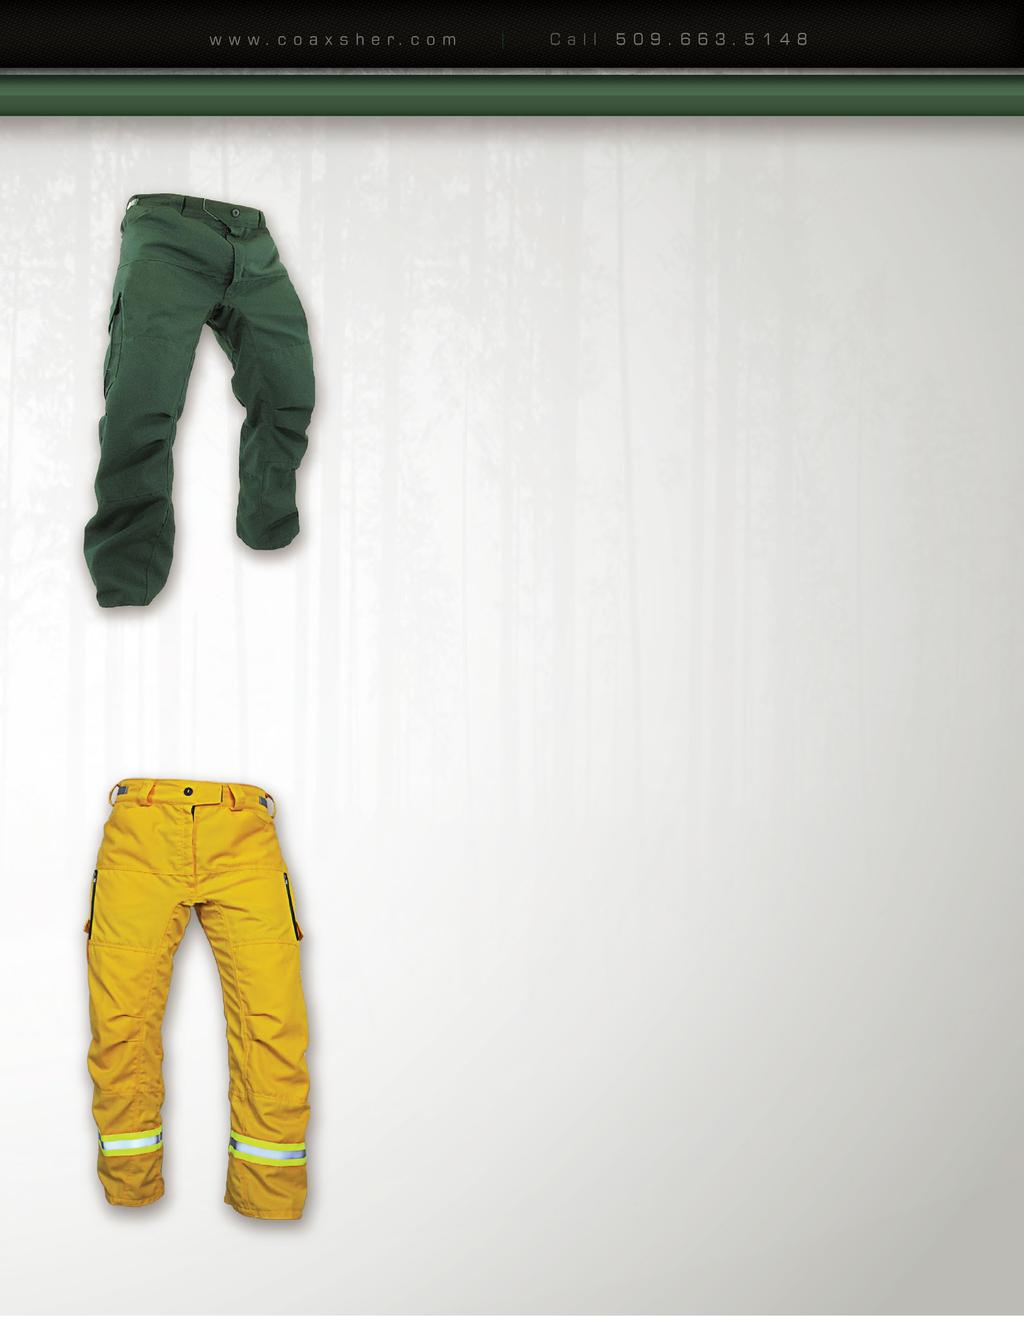 CX WILDLAND Vent Brush Pant The CX Wildland Fire Pants are the perfect balance between protection and comfort.